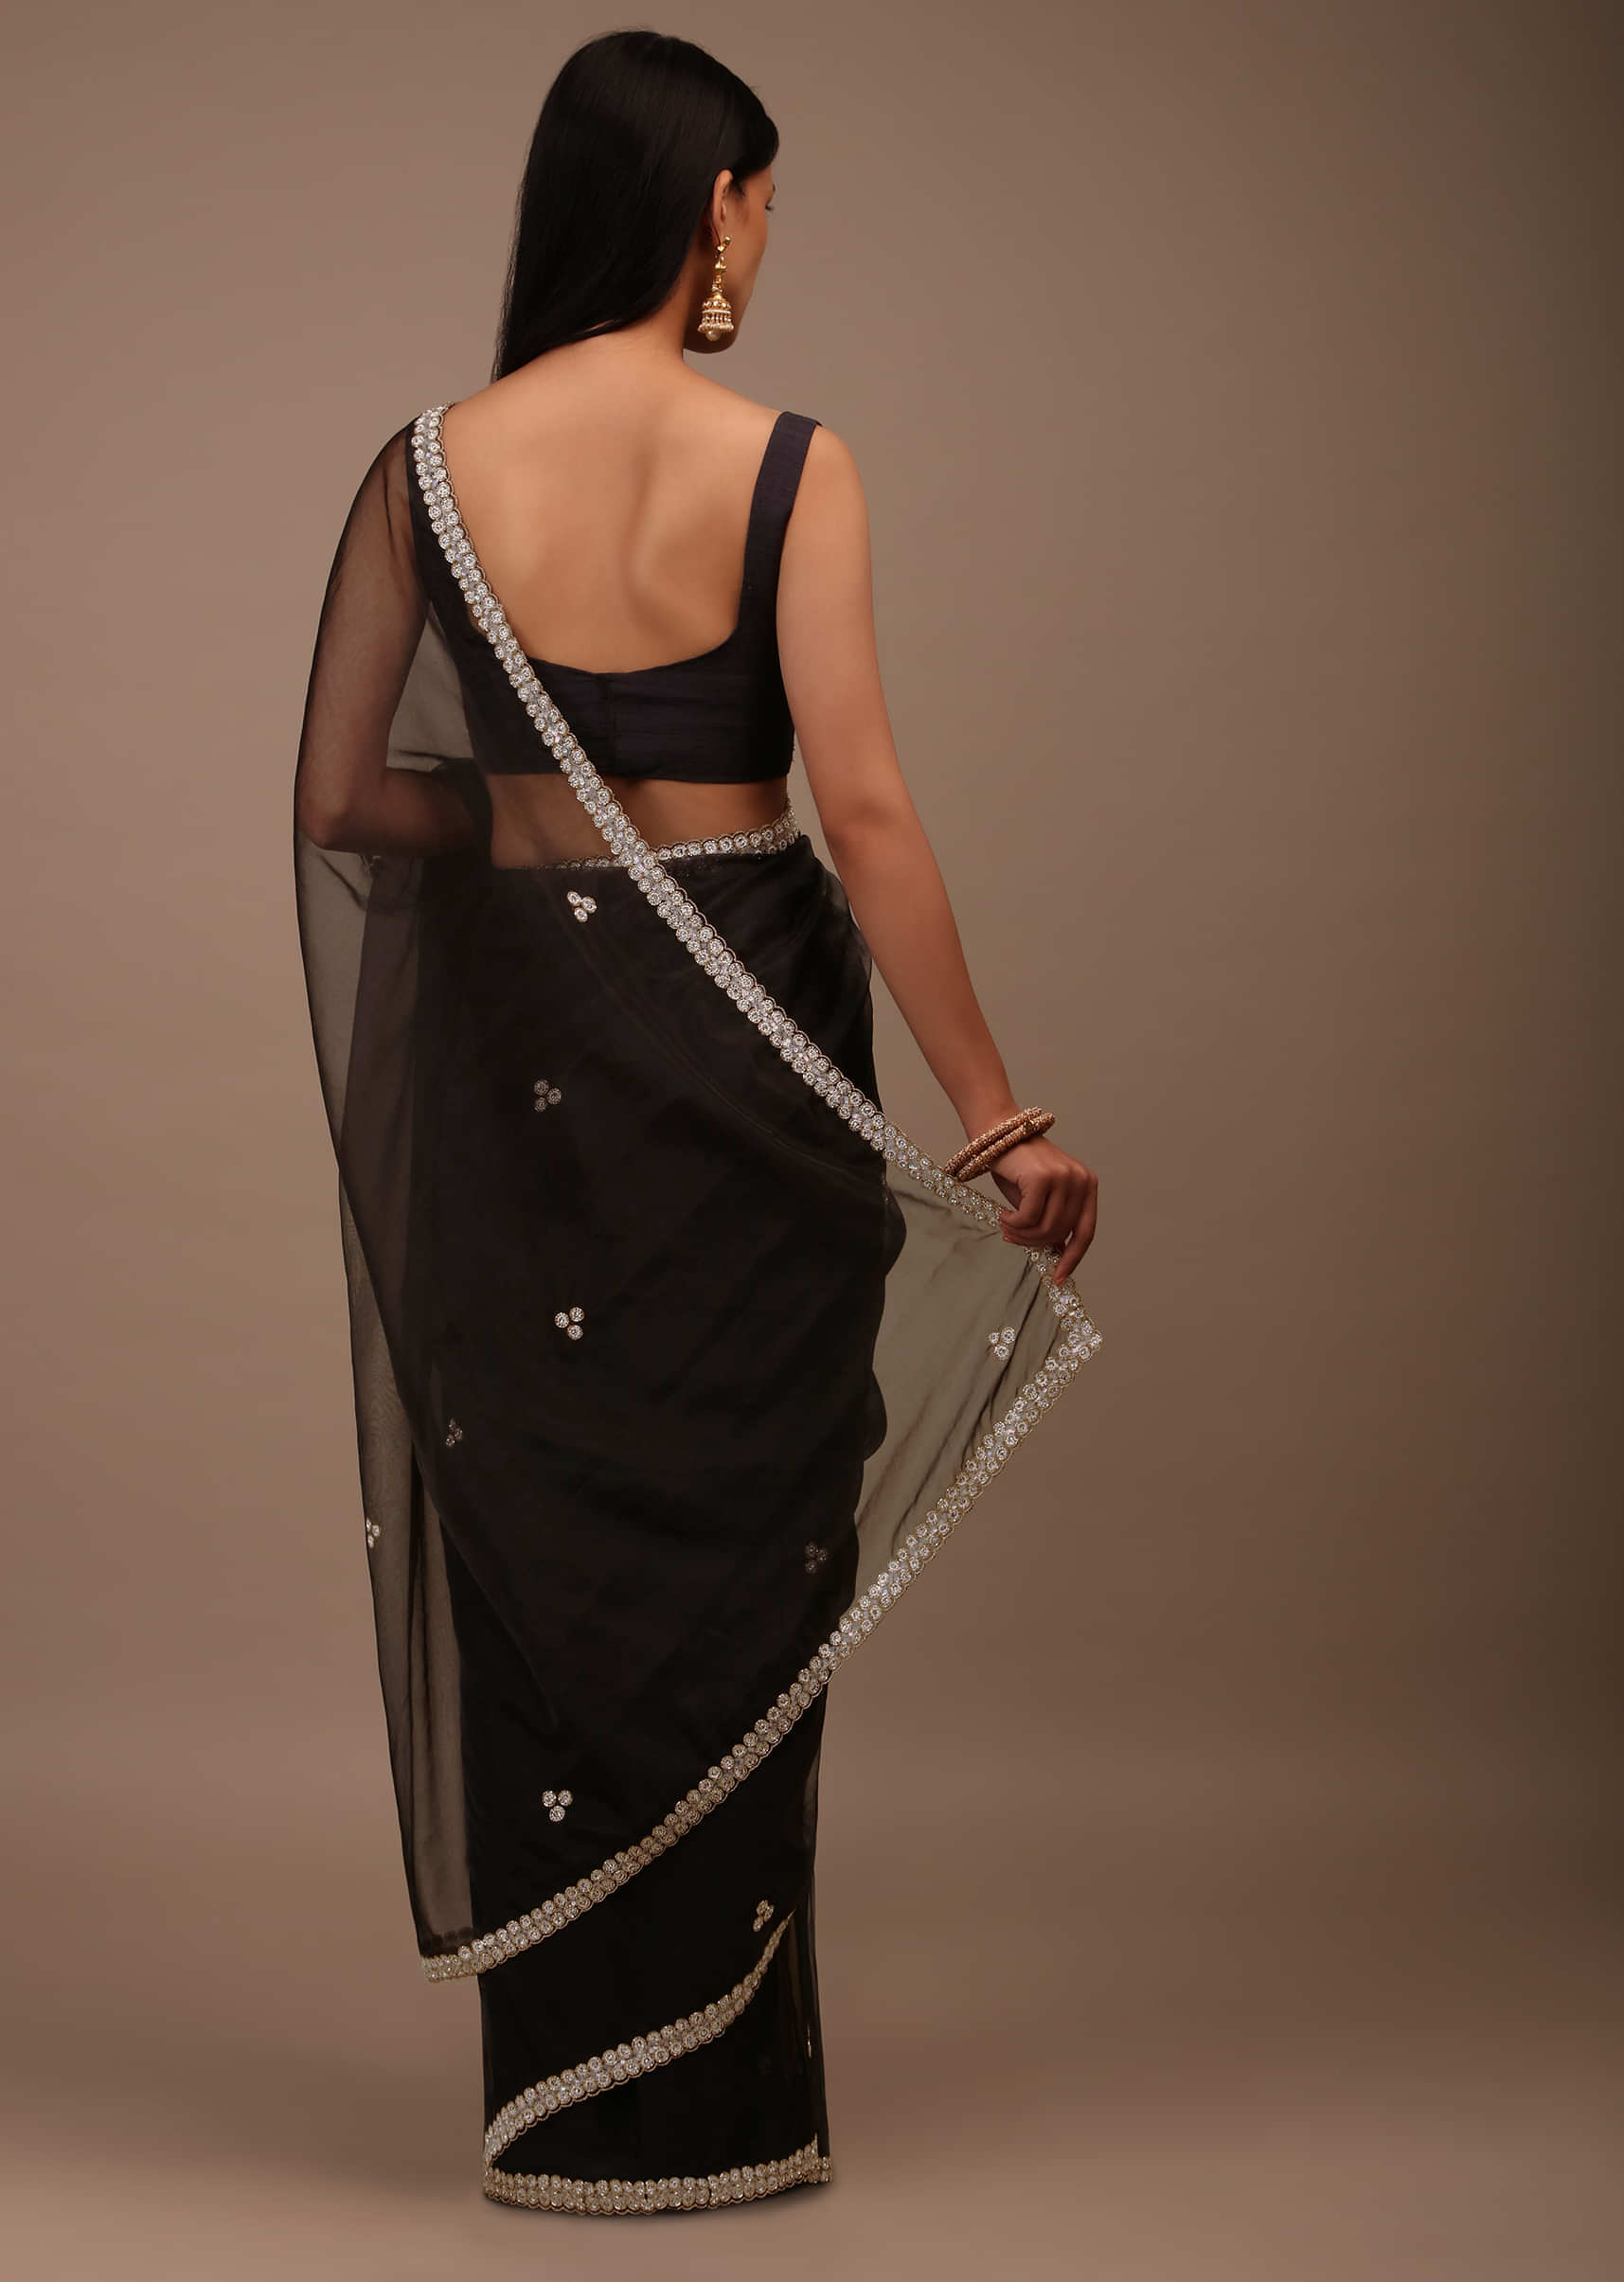 Black Saree In Organza With Hand Embellished Cut Dana And Moti Detailing On The Border